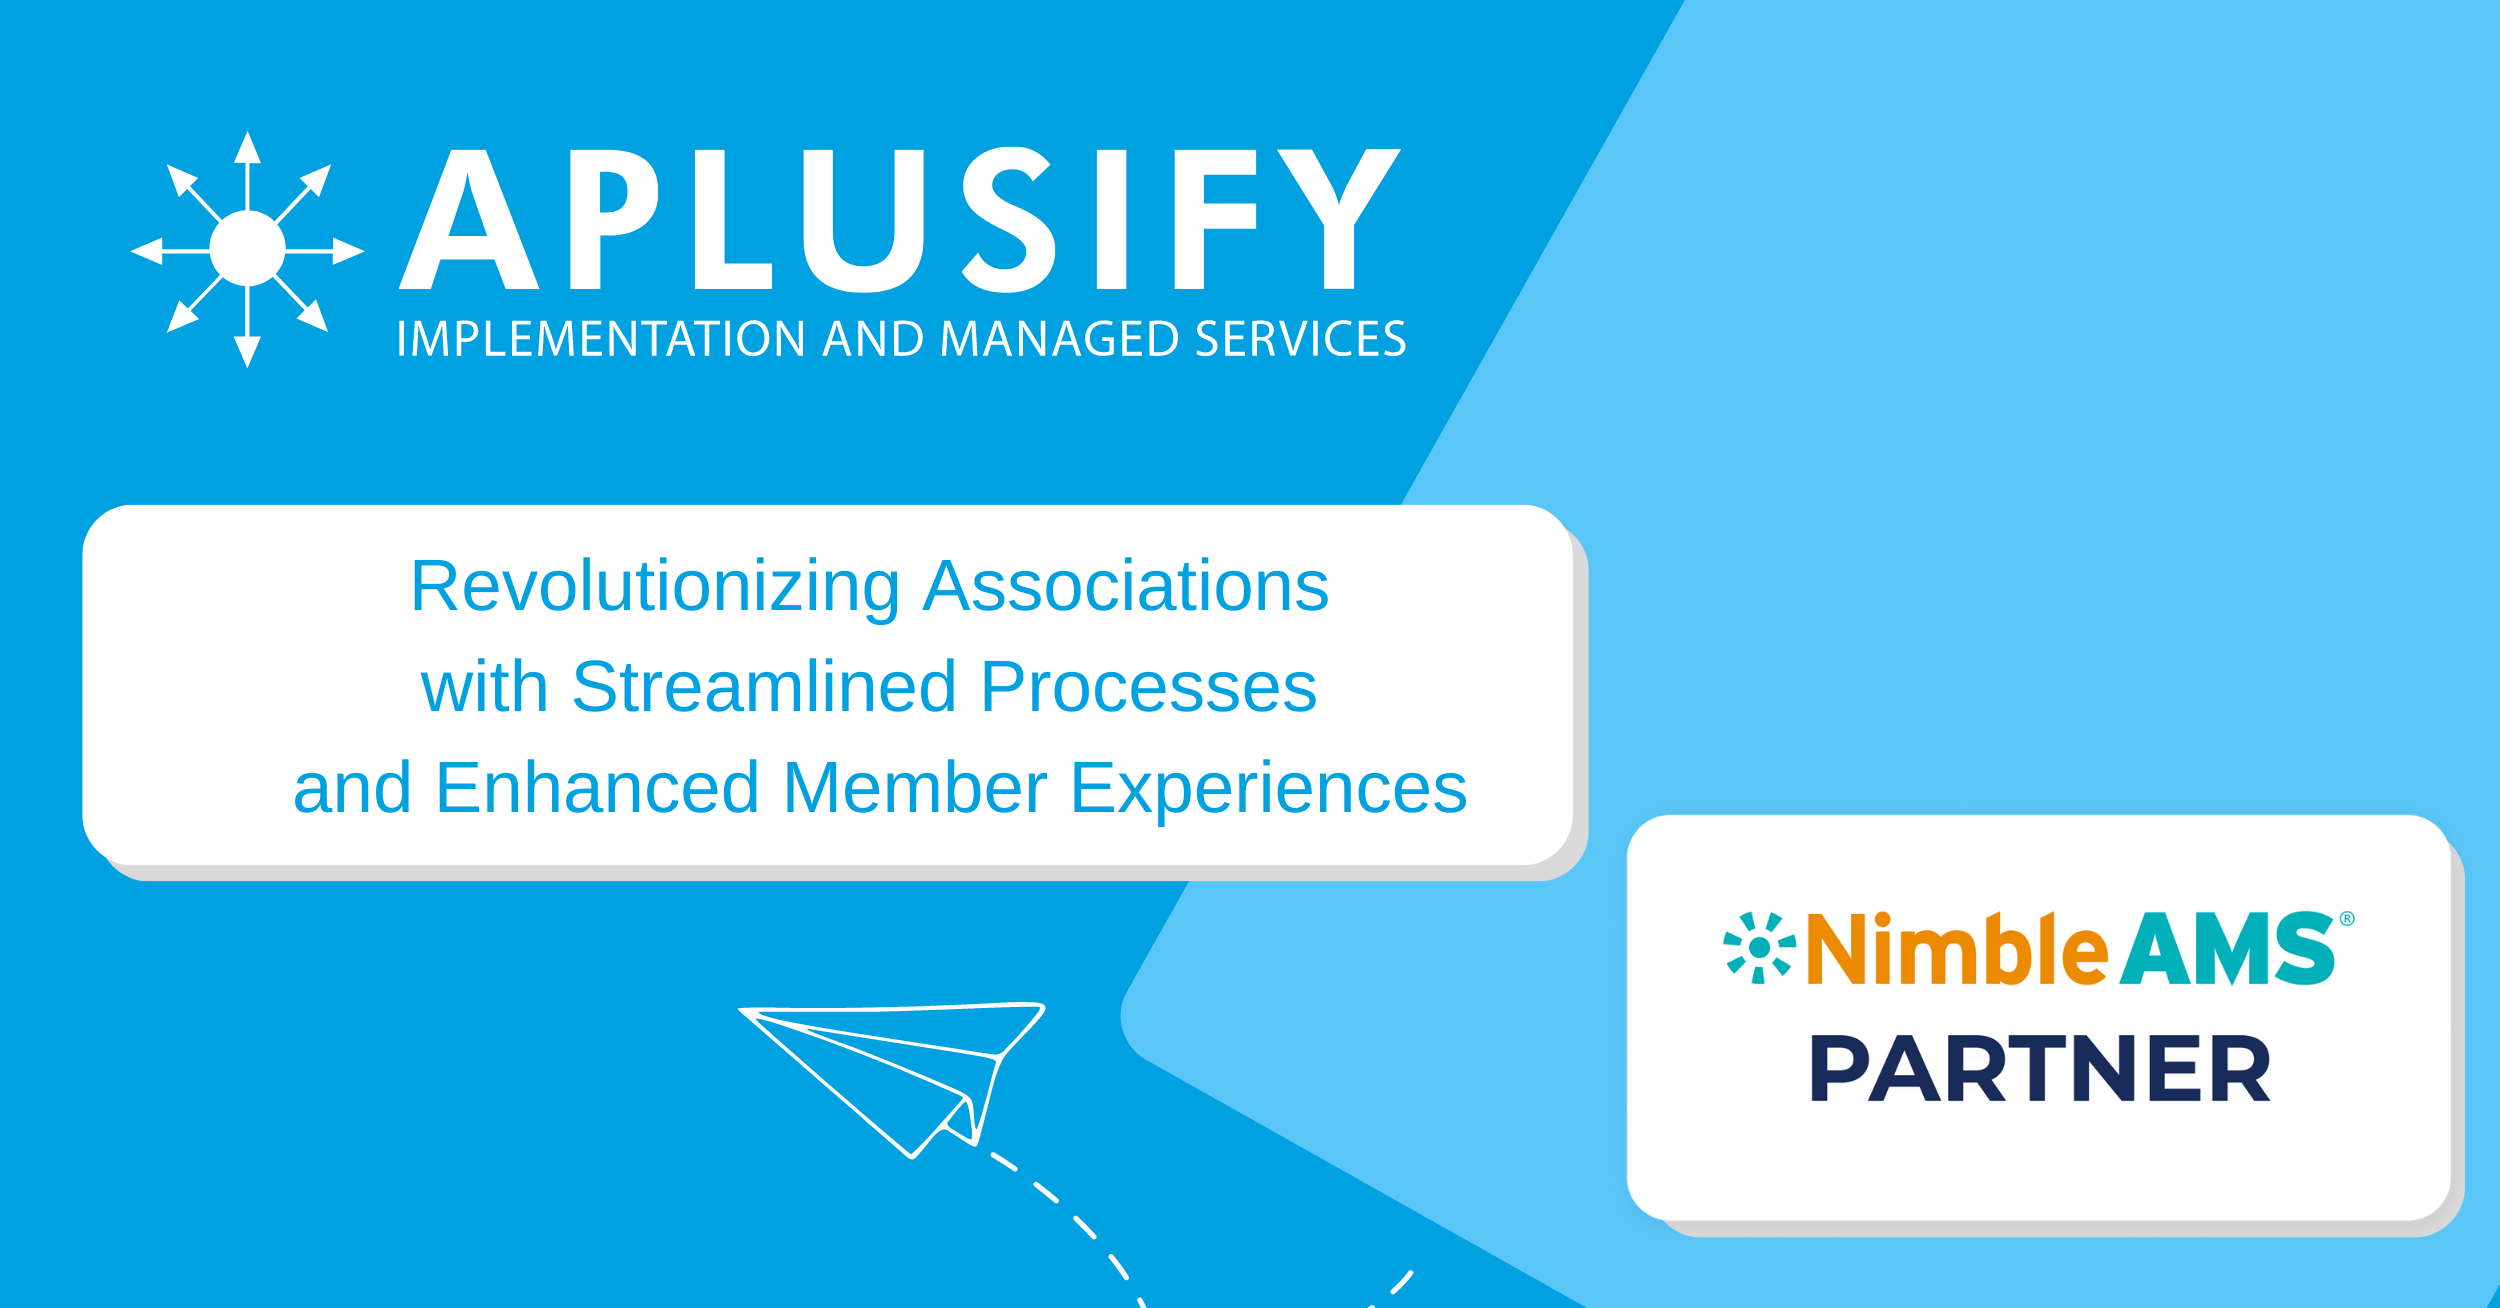 Nimble AMS and Aplusify Partner to Empower Associations with Enhanced Salesforce Integration and Support